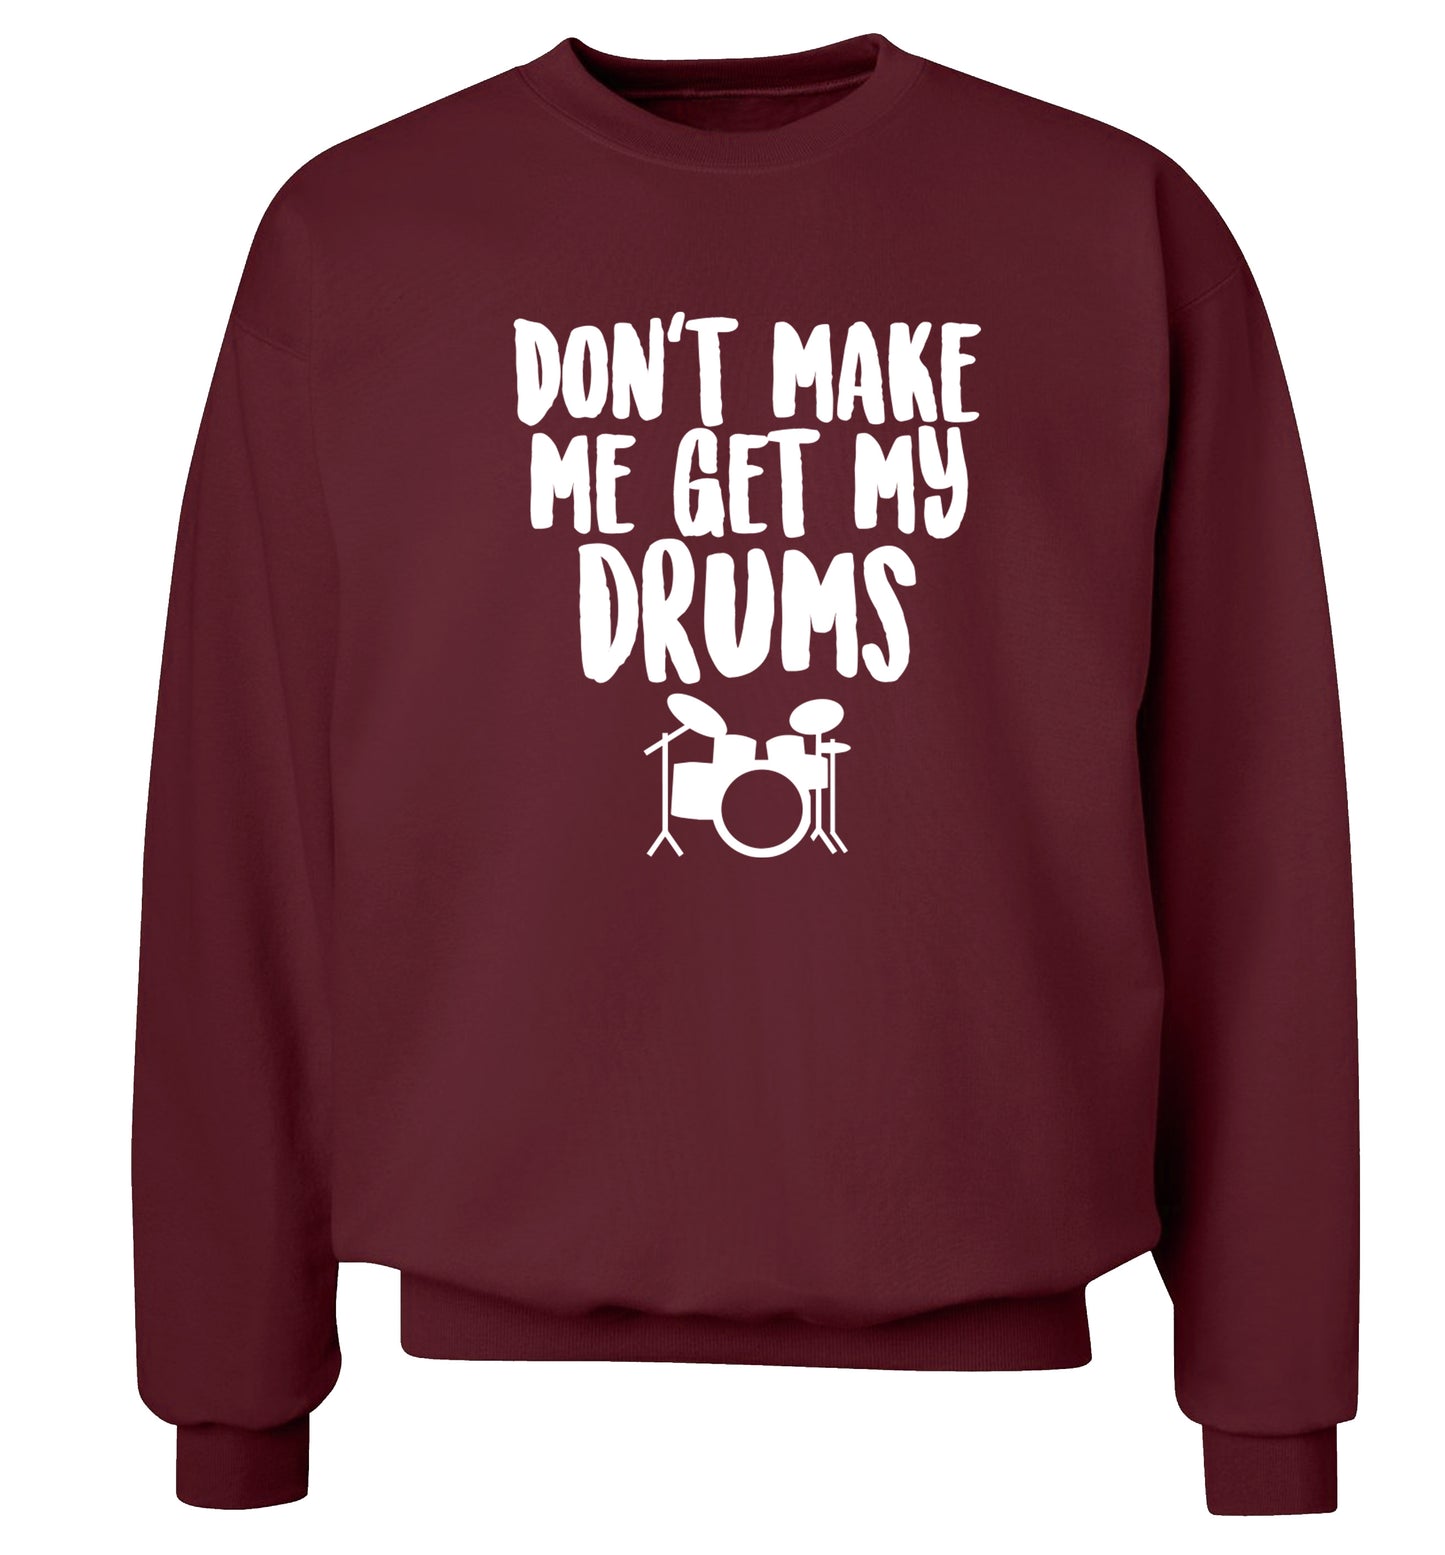 Don't make me get my drums Adult's unisex maroon Sweater 2XL